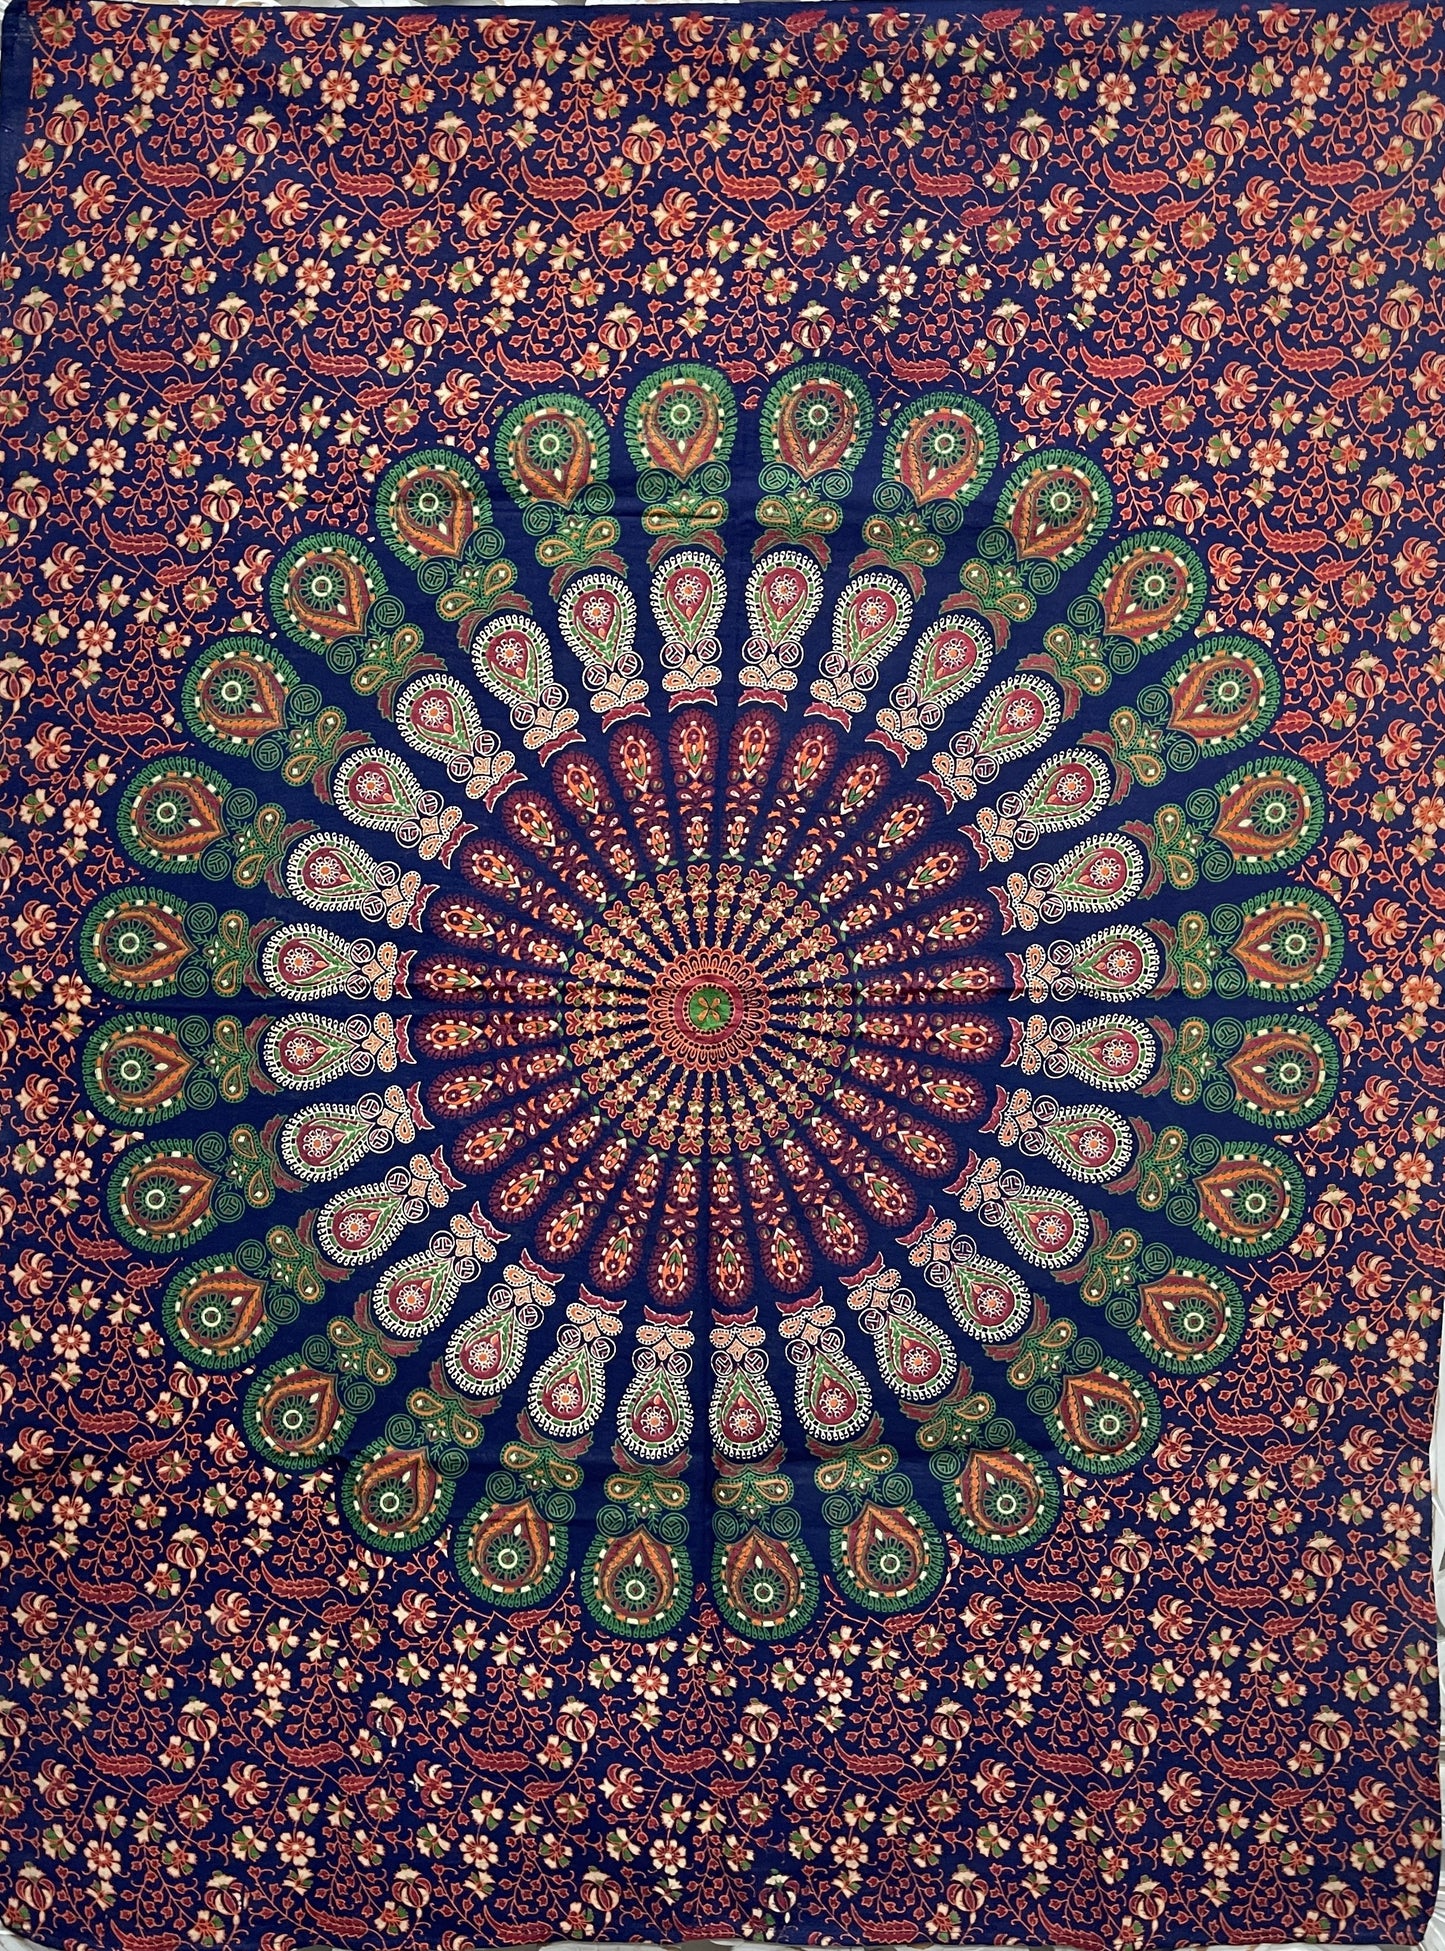 Hand printed Mandala Fabric Poster Tapestries- 7 Colors Available